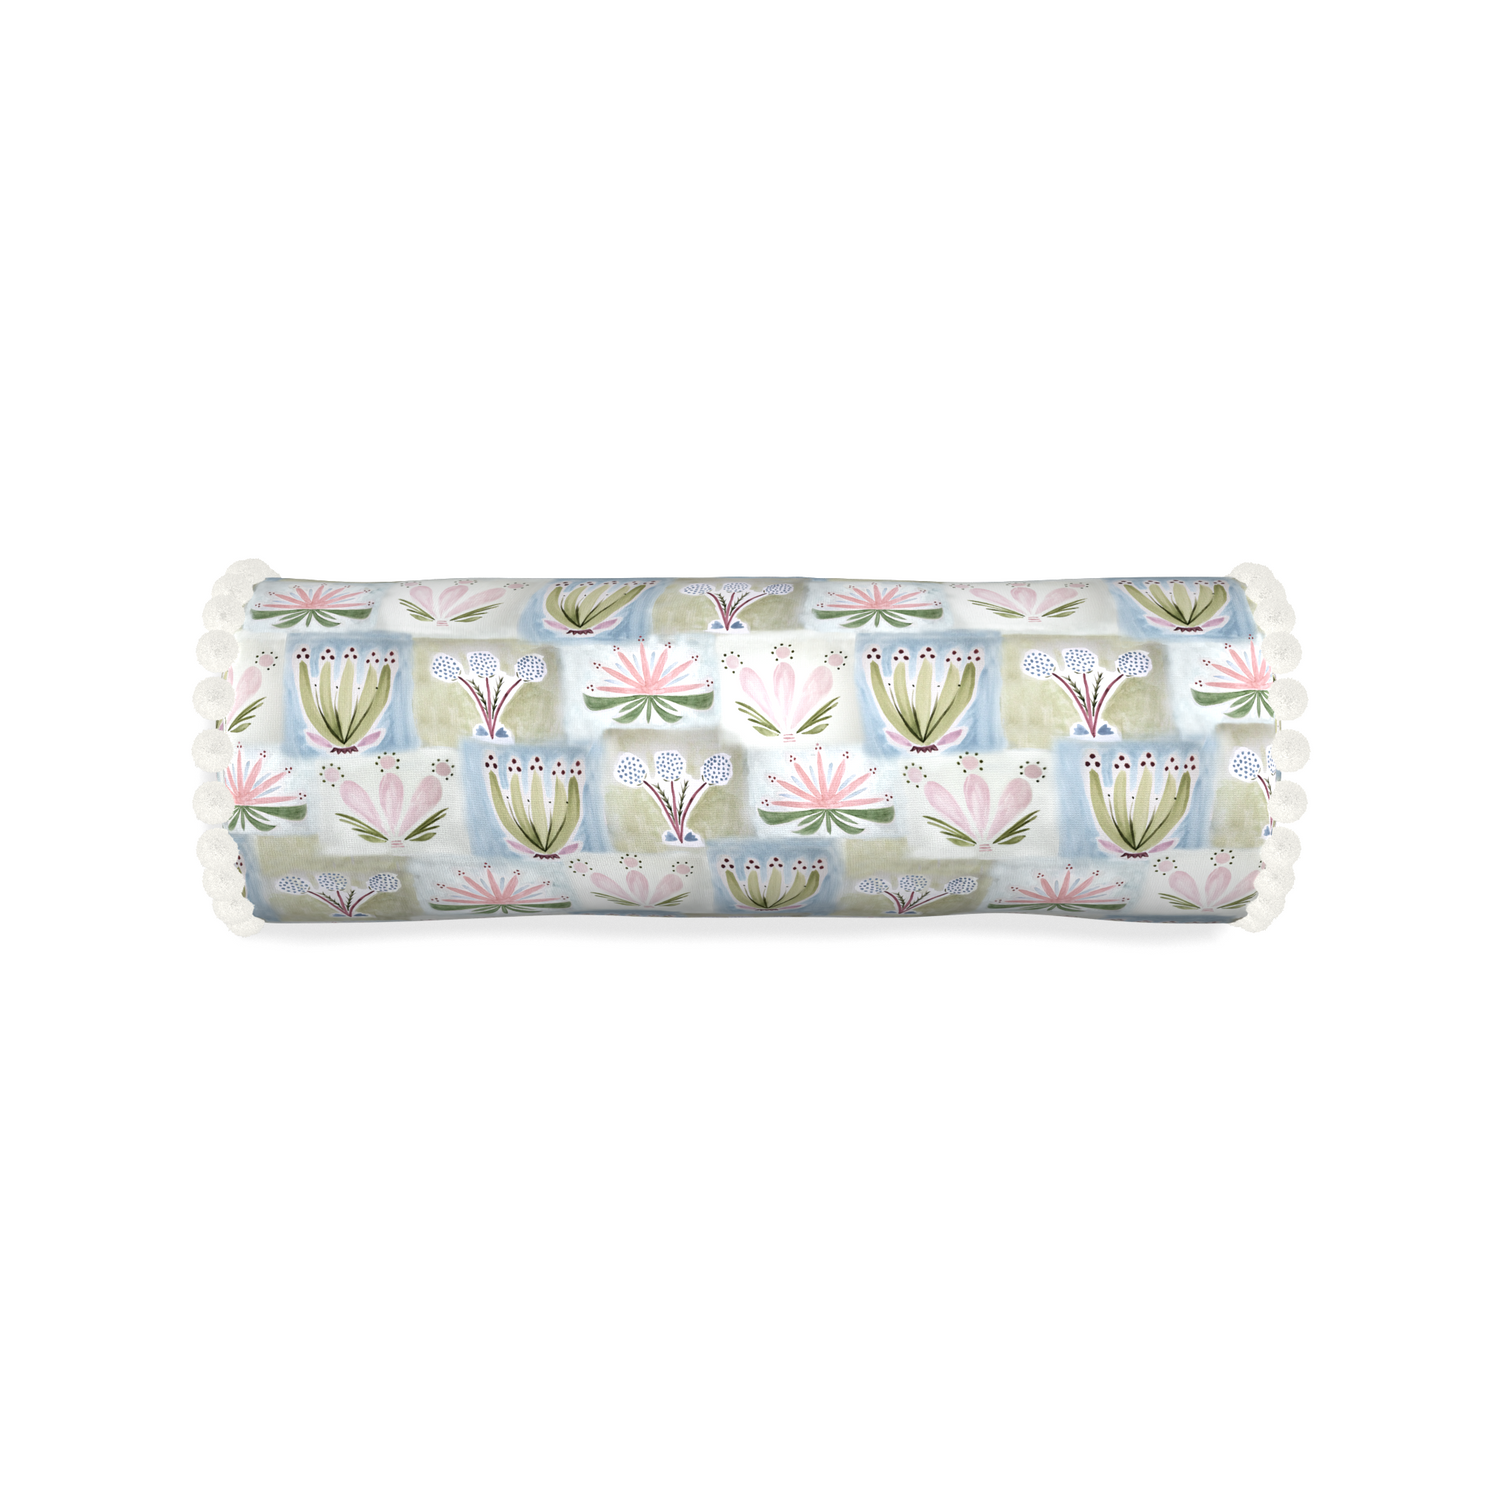 Bolster harper custom hand-painted floralpillow with snow pom pom on white background